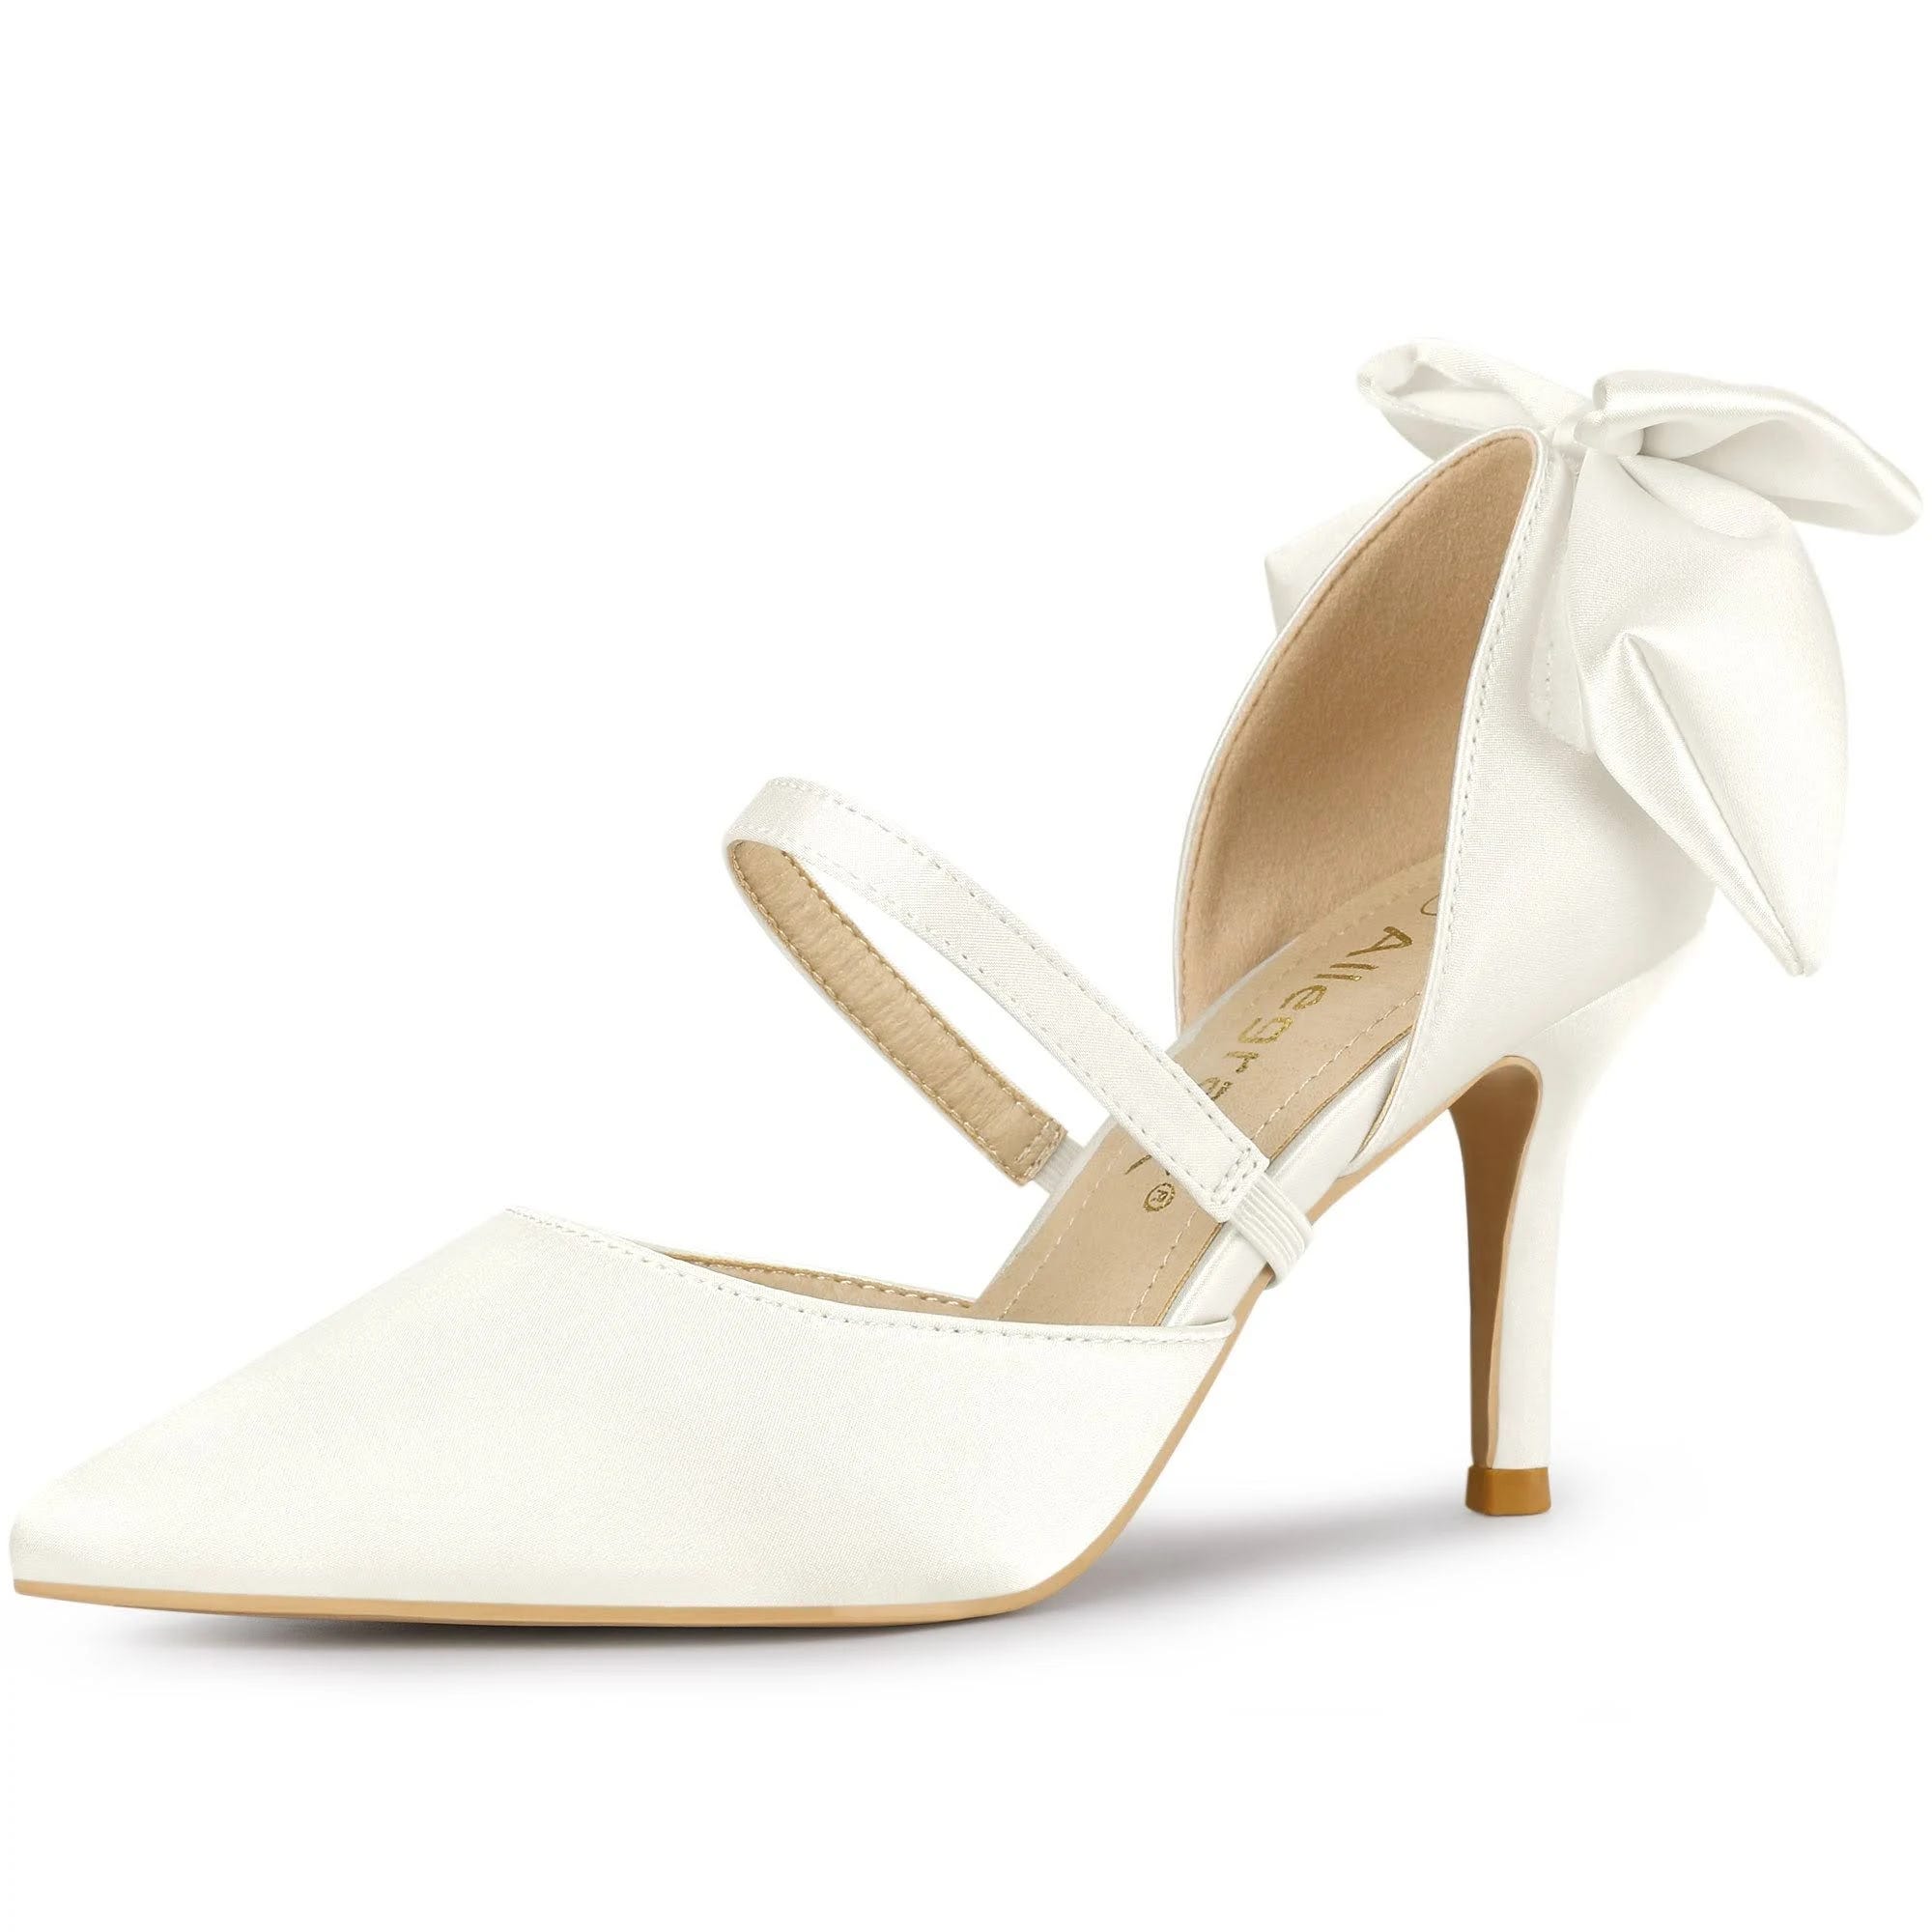 Stylish Satin Pointed Toe Bow Decor Heels for Parties | Image